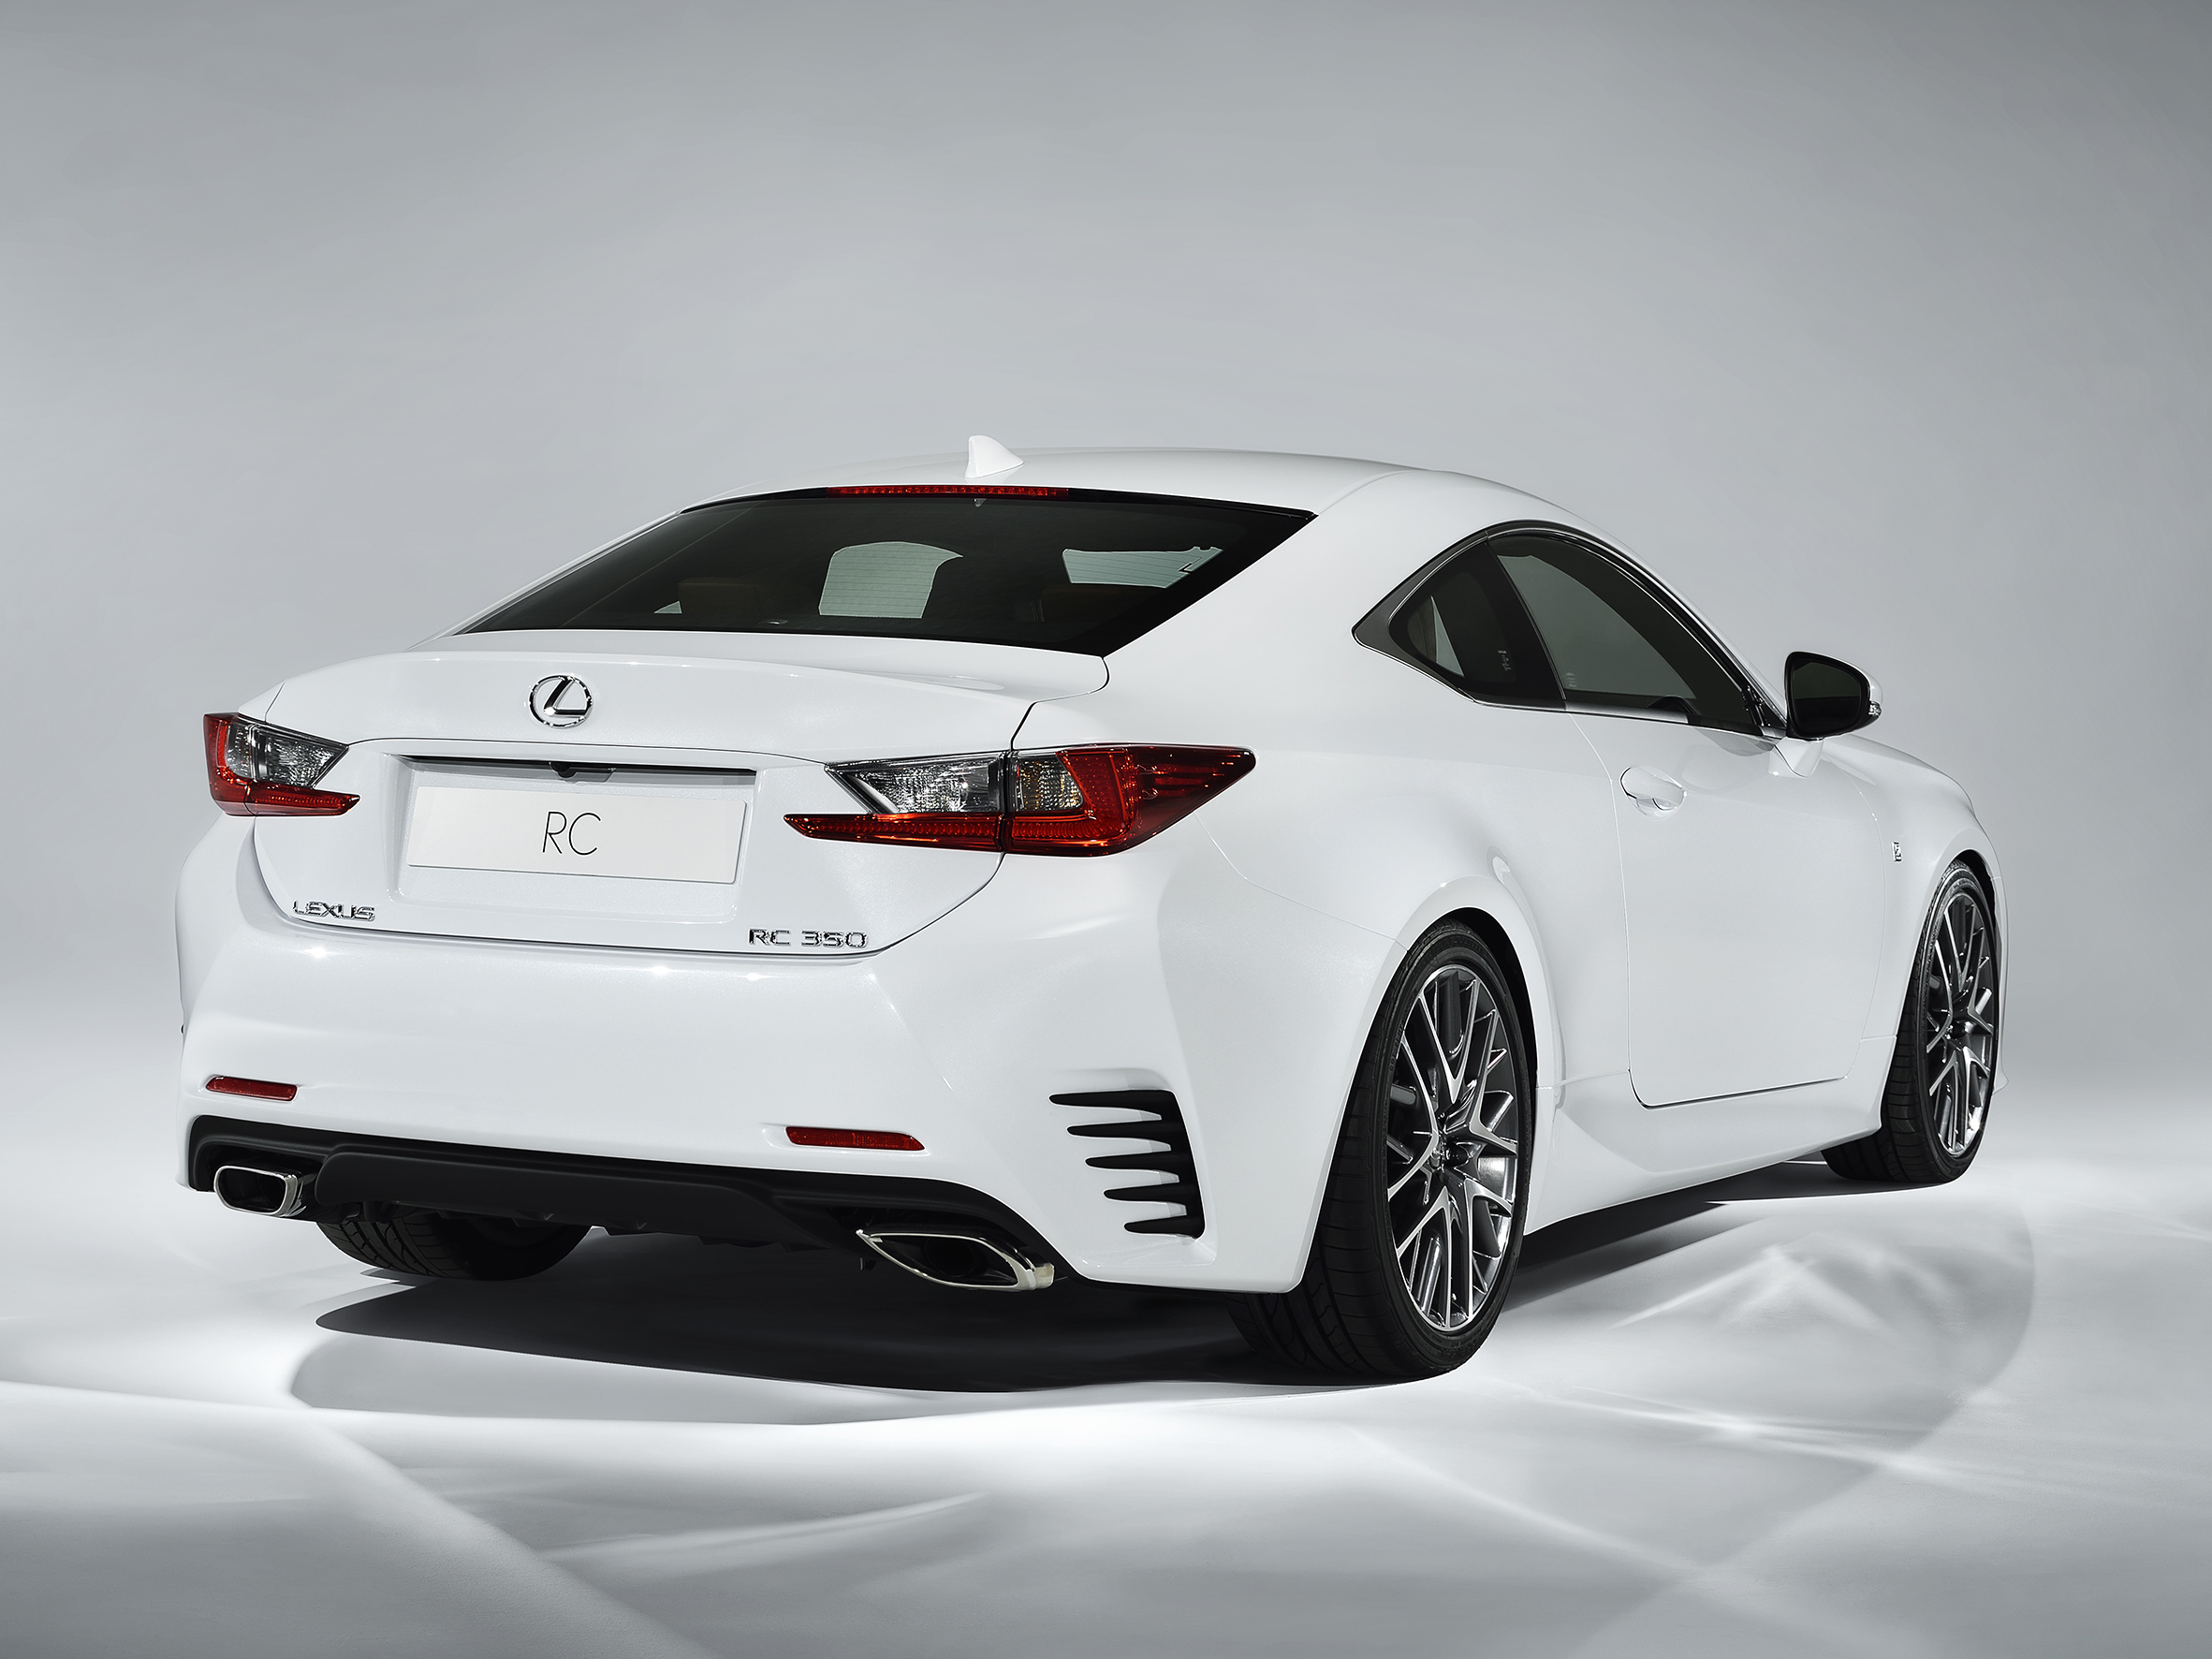 Order books open for all-new Lexus RC coupe